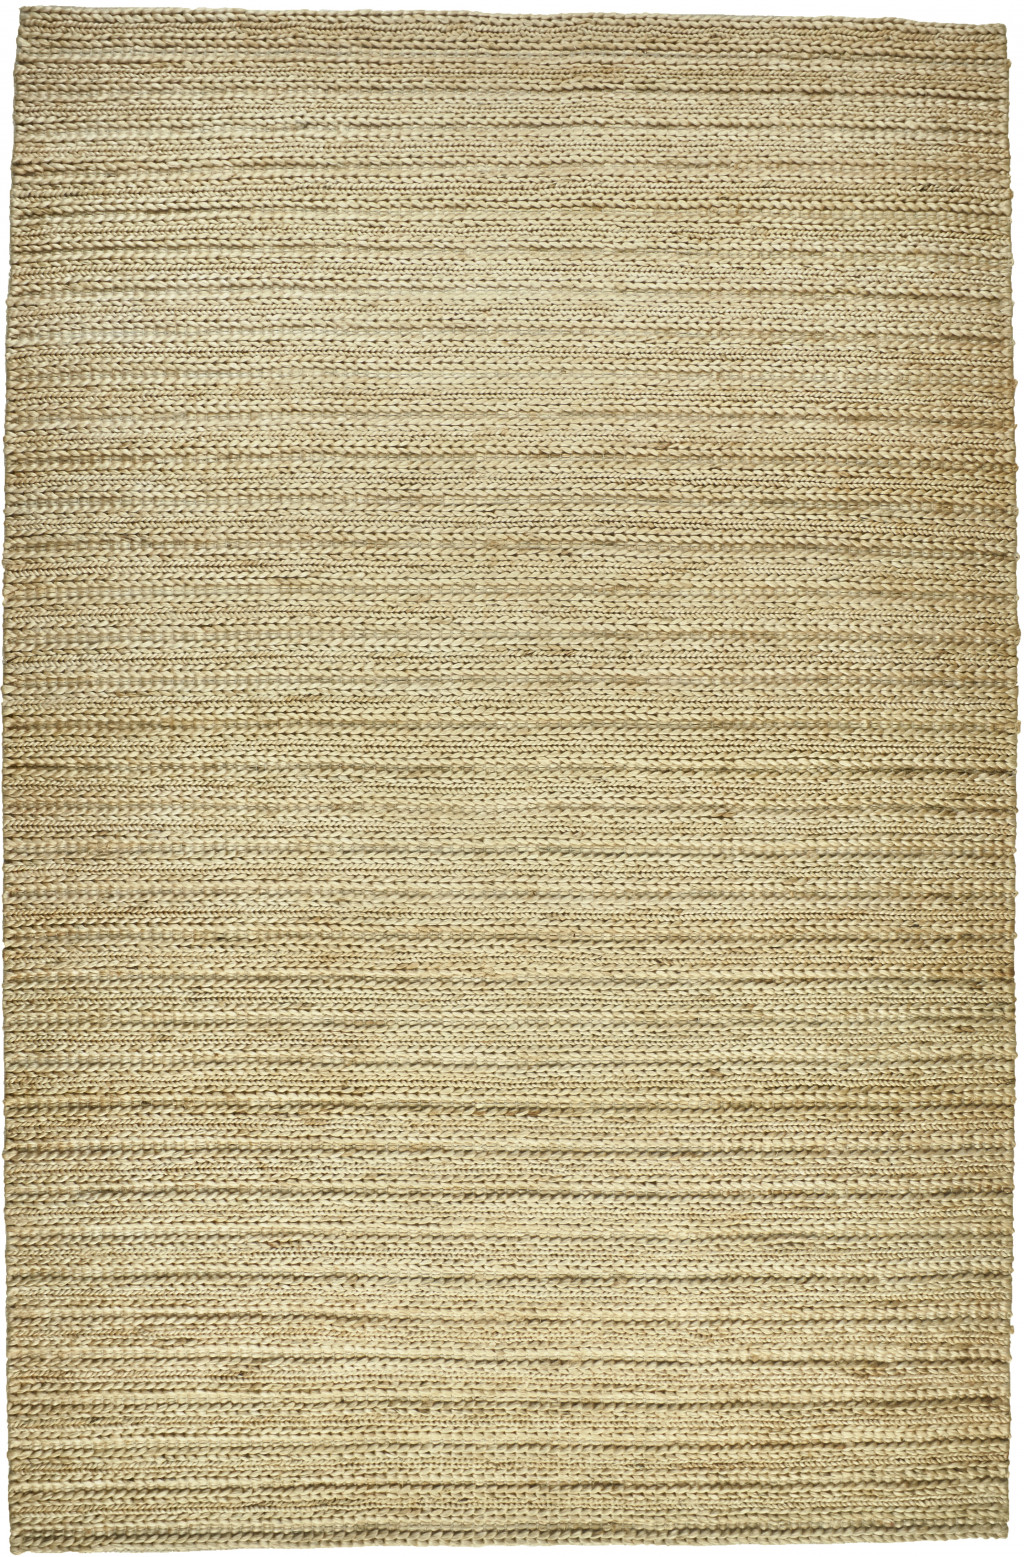 2' X 3' Tan Ivory And Taupe Hand Woven Area Rug-511424-1